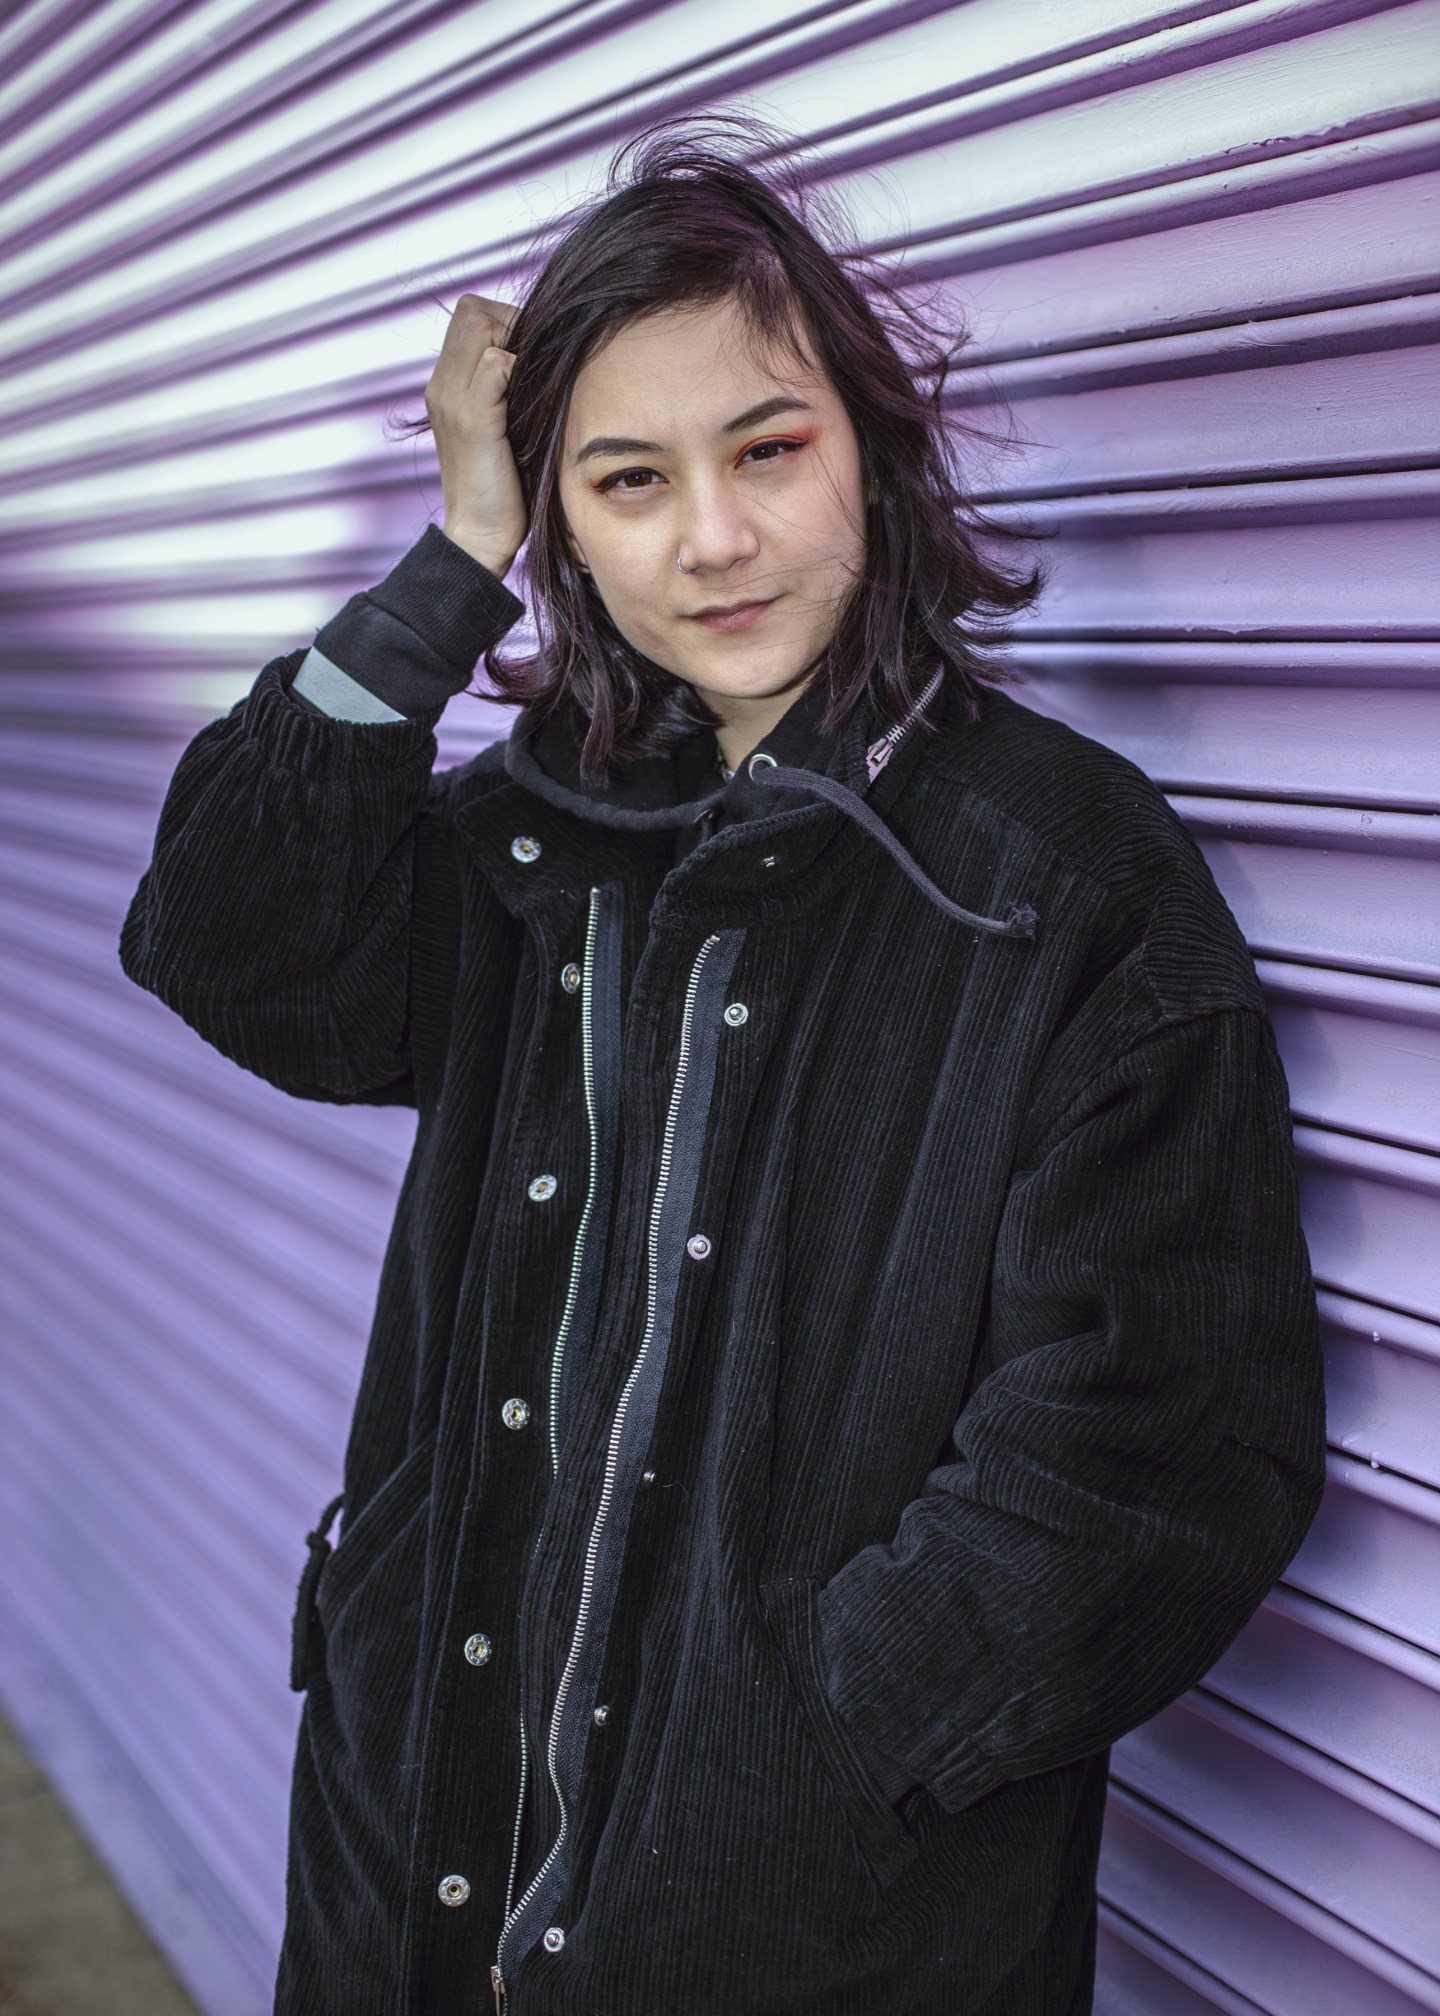 Japanese Breakfast had a good 2017 and if there’s justice in the world she’ll have a good 2018 too